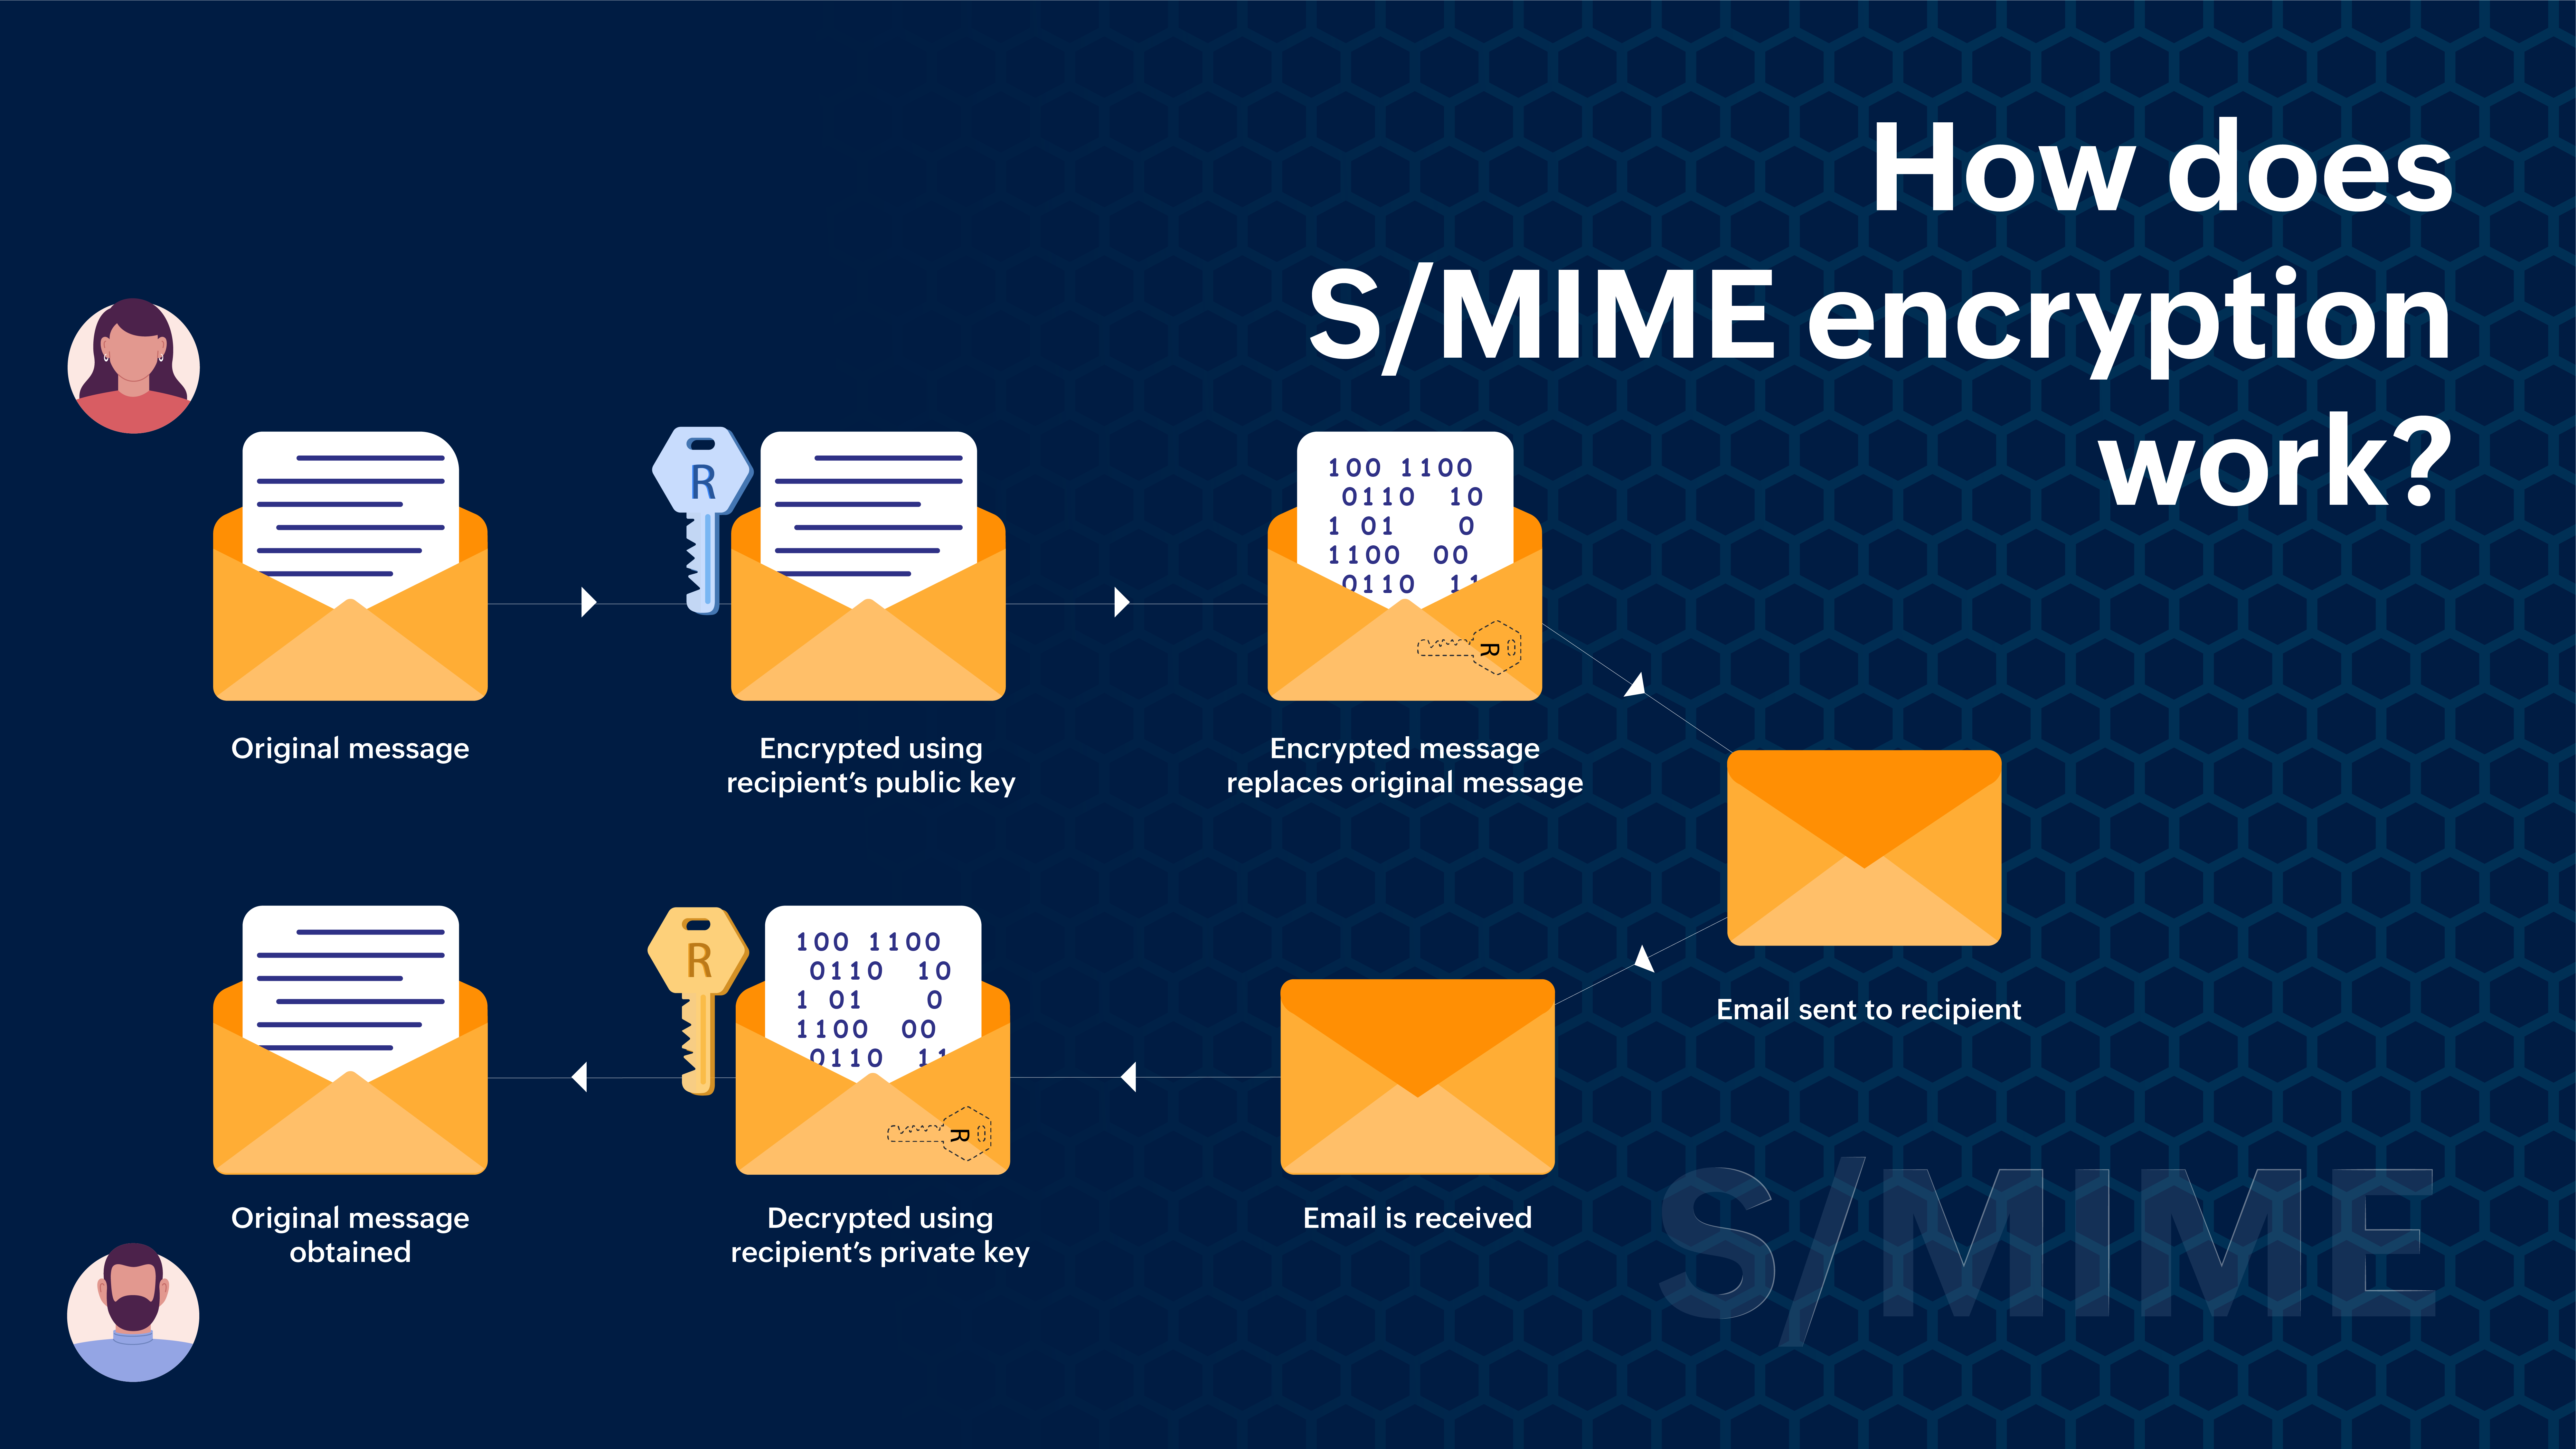 How does S/MIME work?